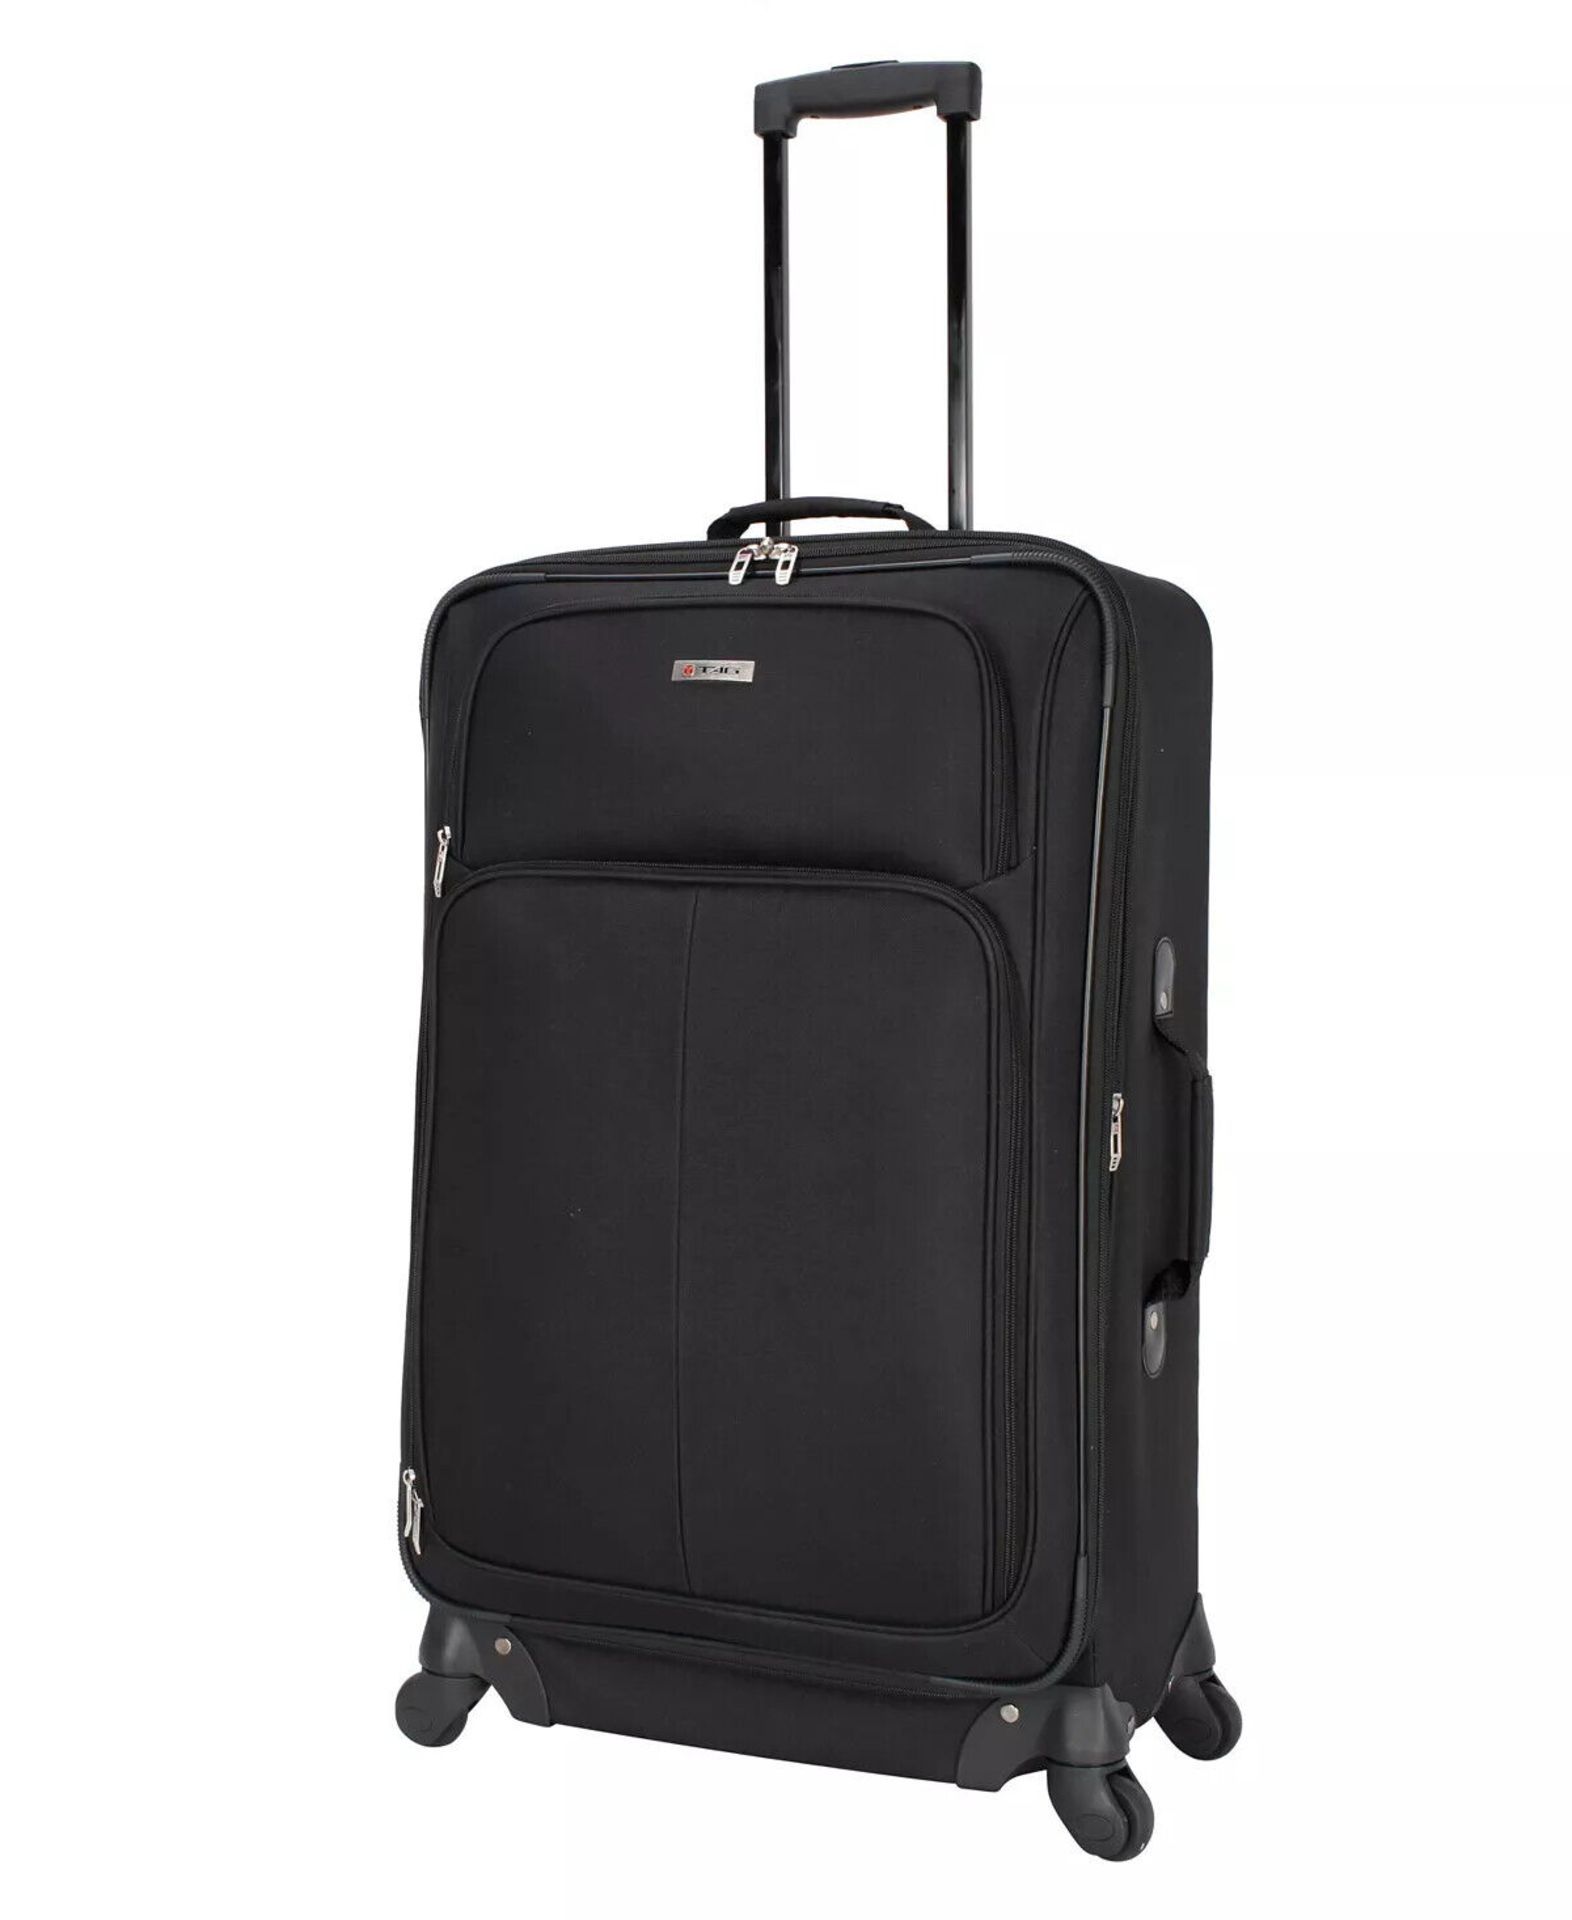 3 X NEW SETS OF TAG Ridgefield Black 5 Piece Softside Luggage Sets. RRP $300 per set, giving this - Image 3 of 4